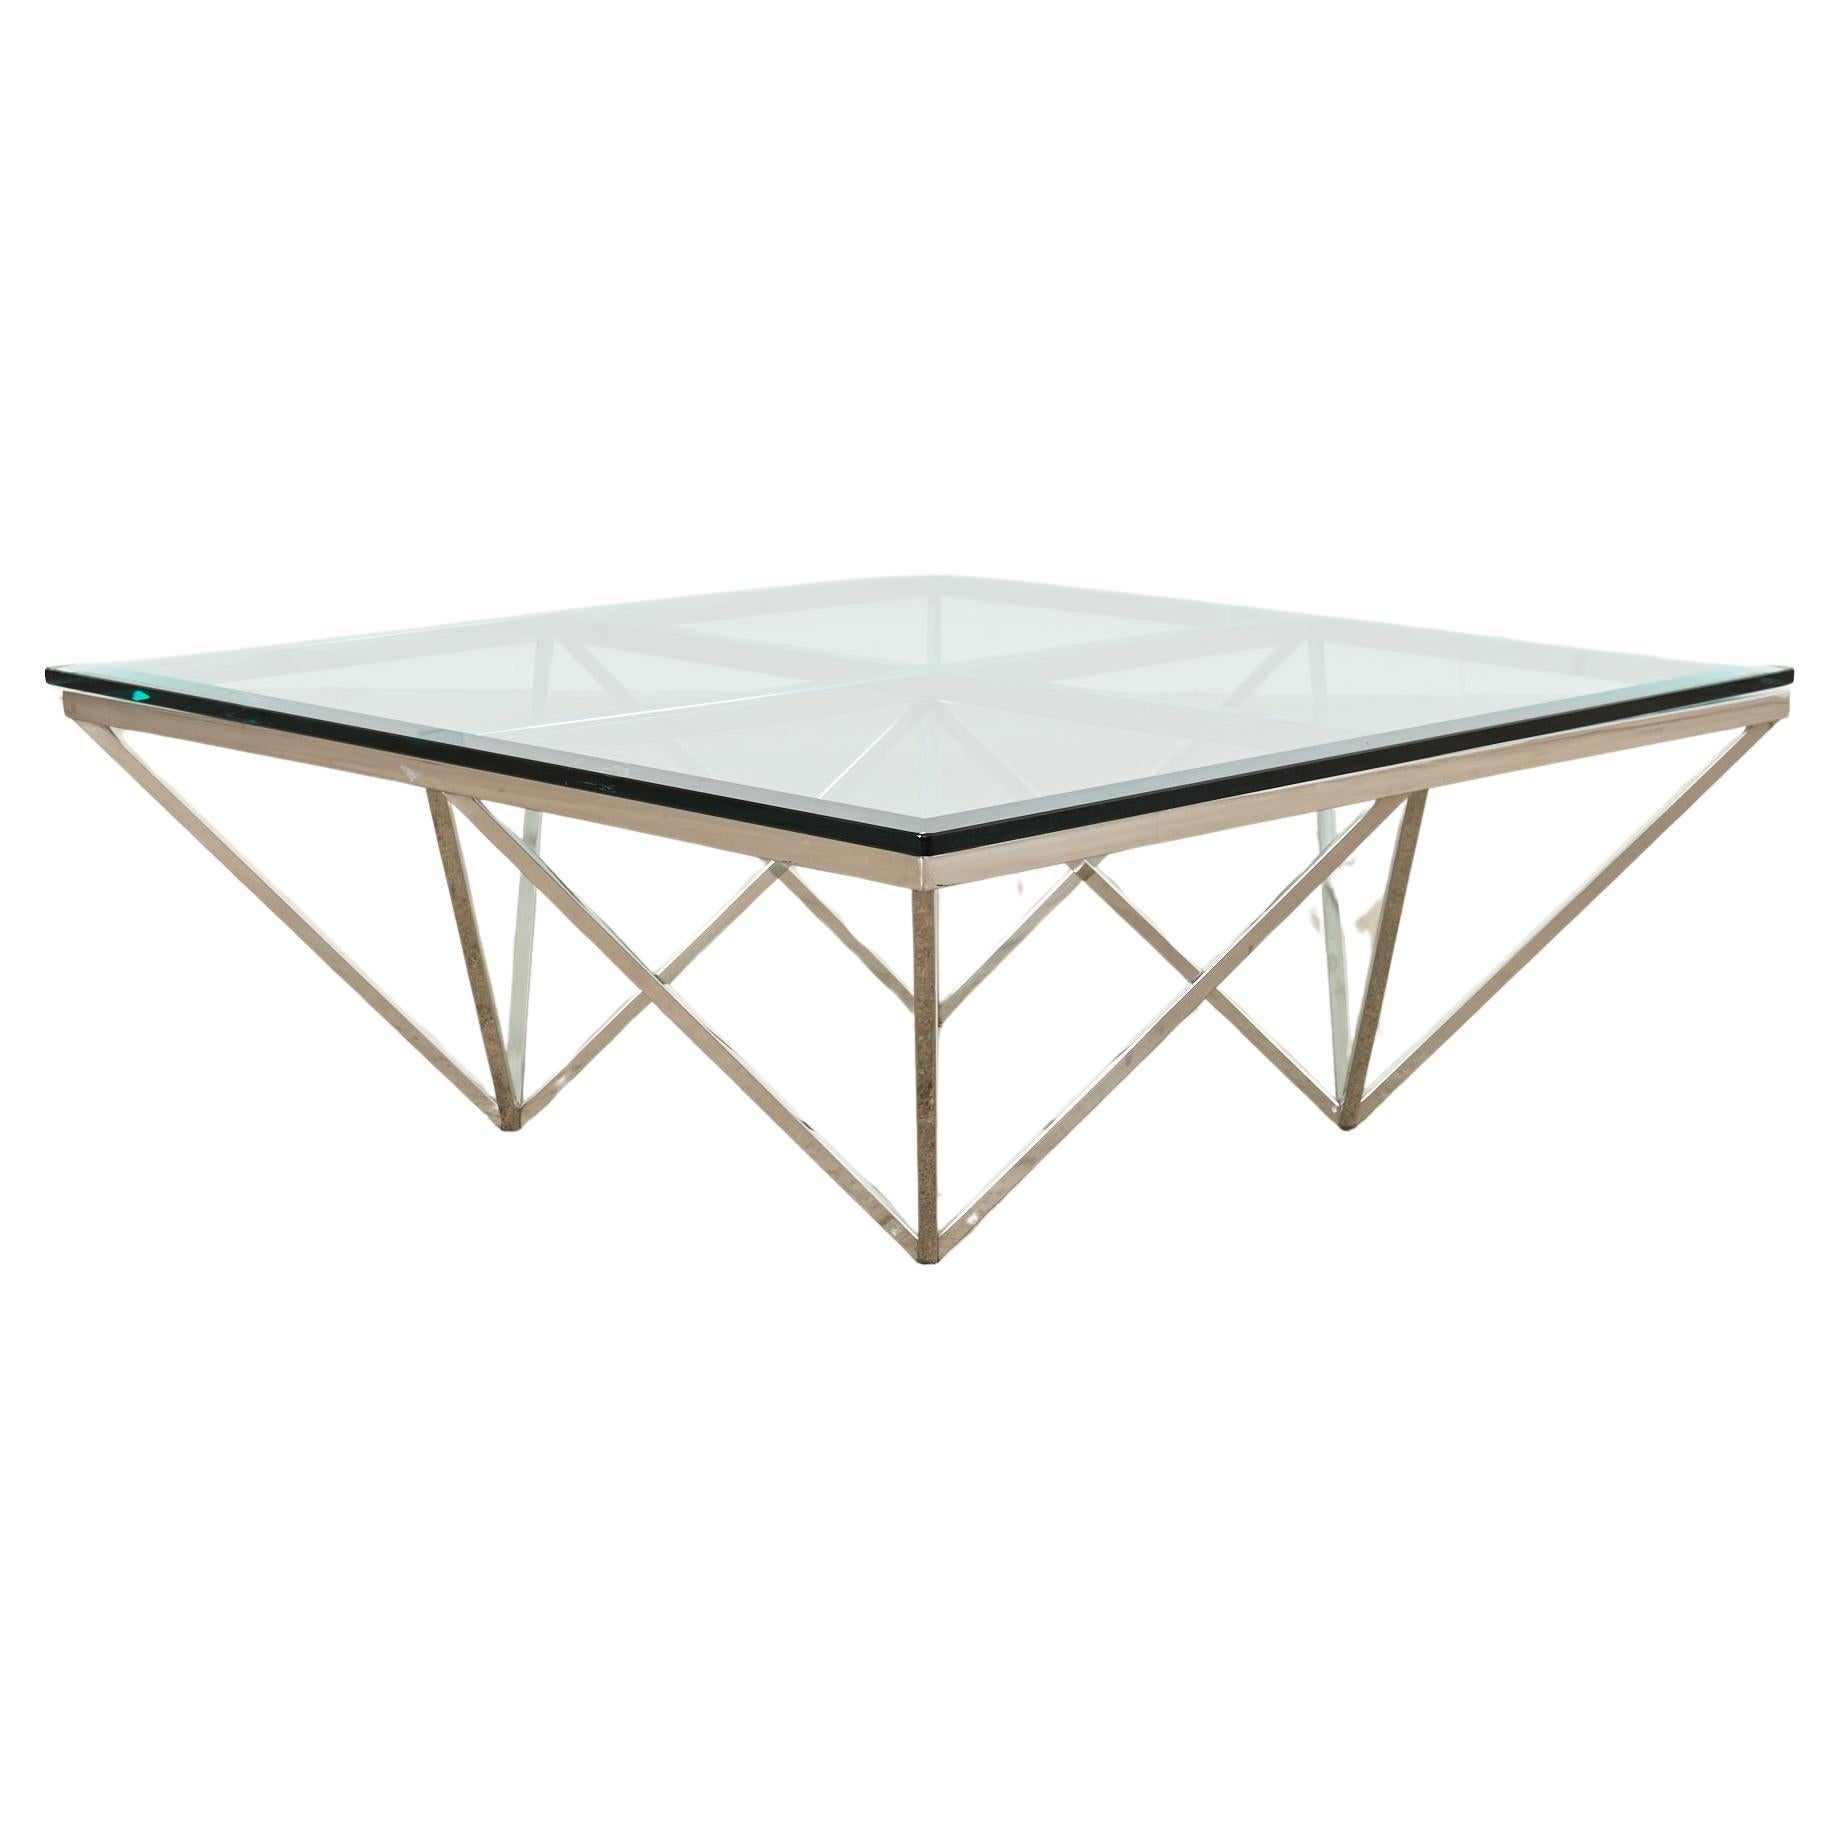 Paolo Piva Style Alanda Square Pyramidal Cocktail Table For Sale